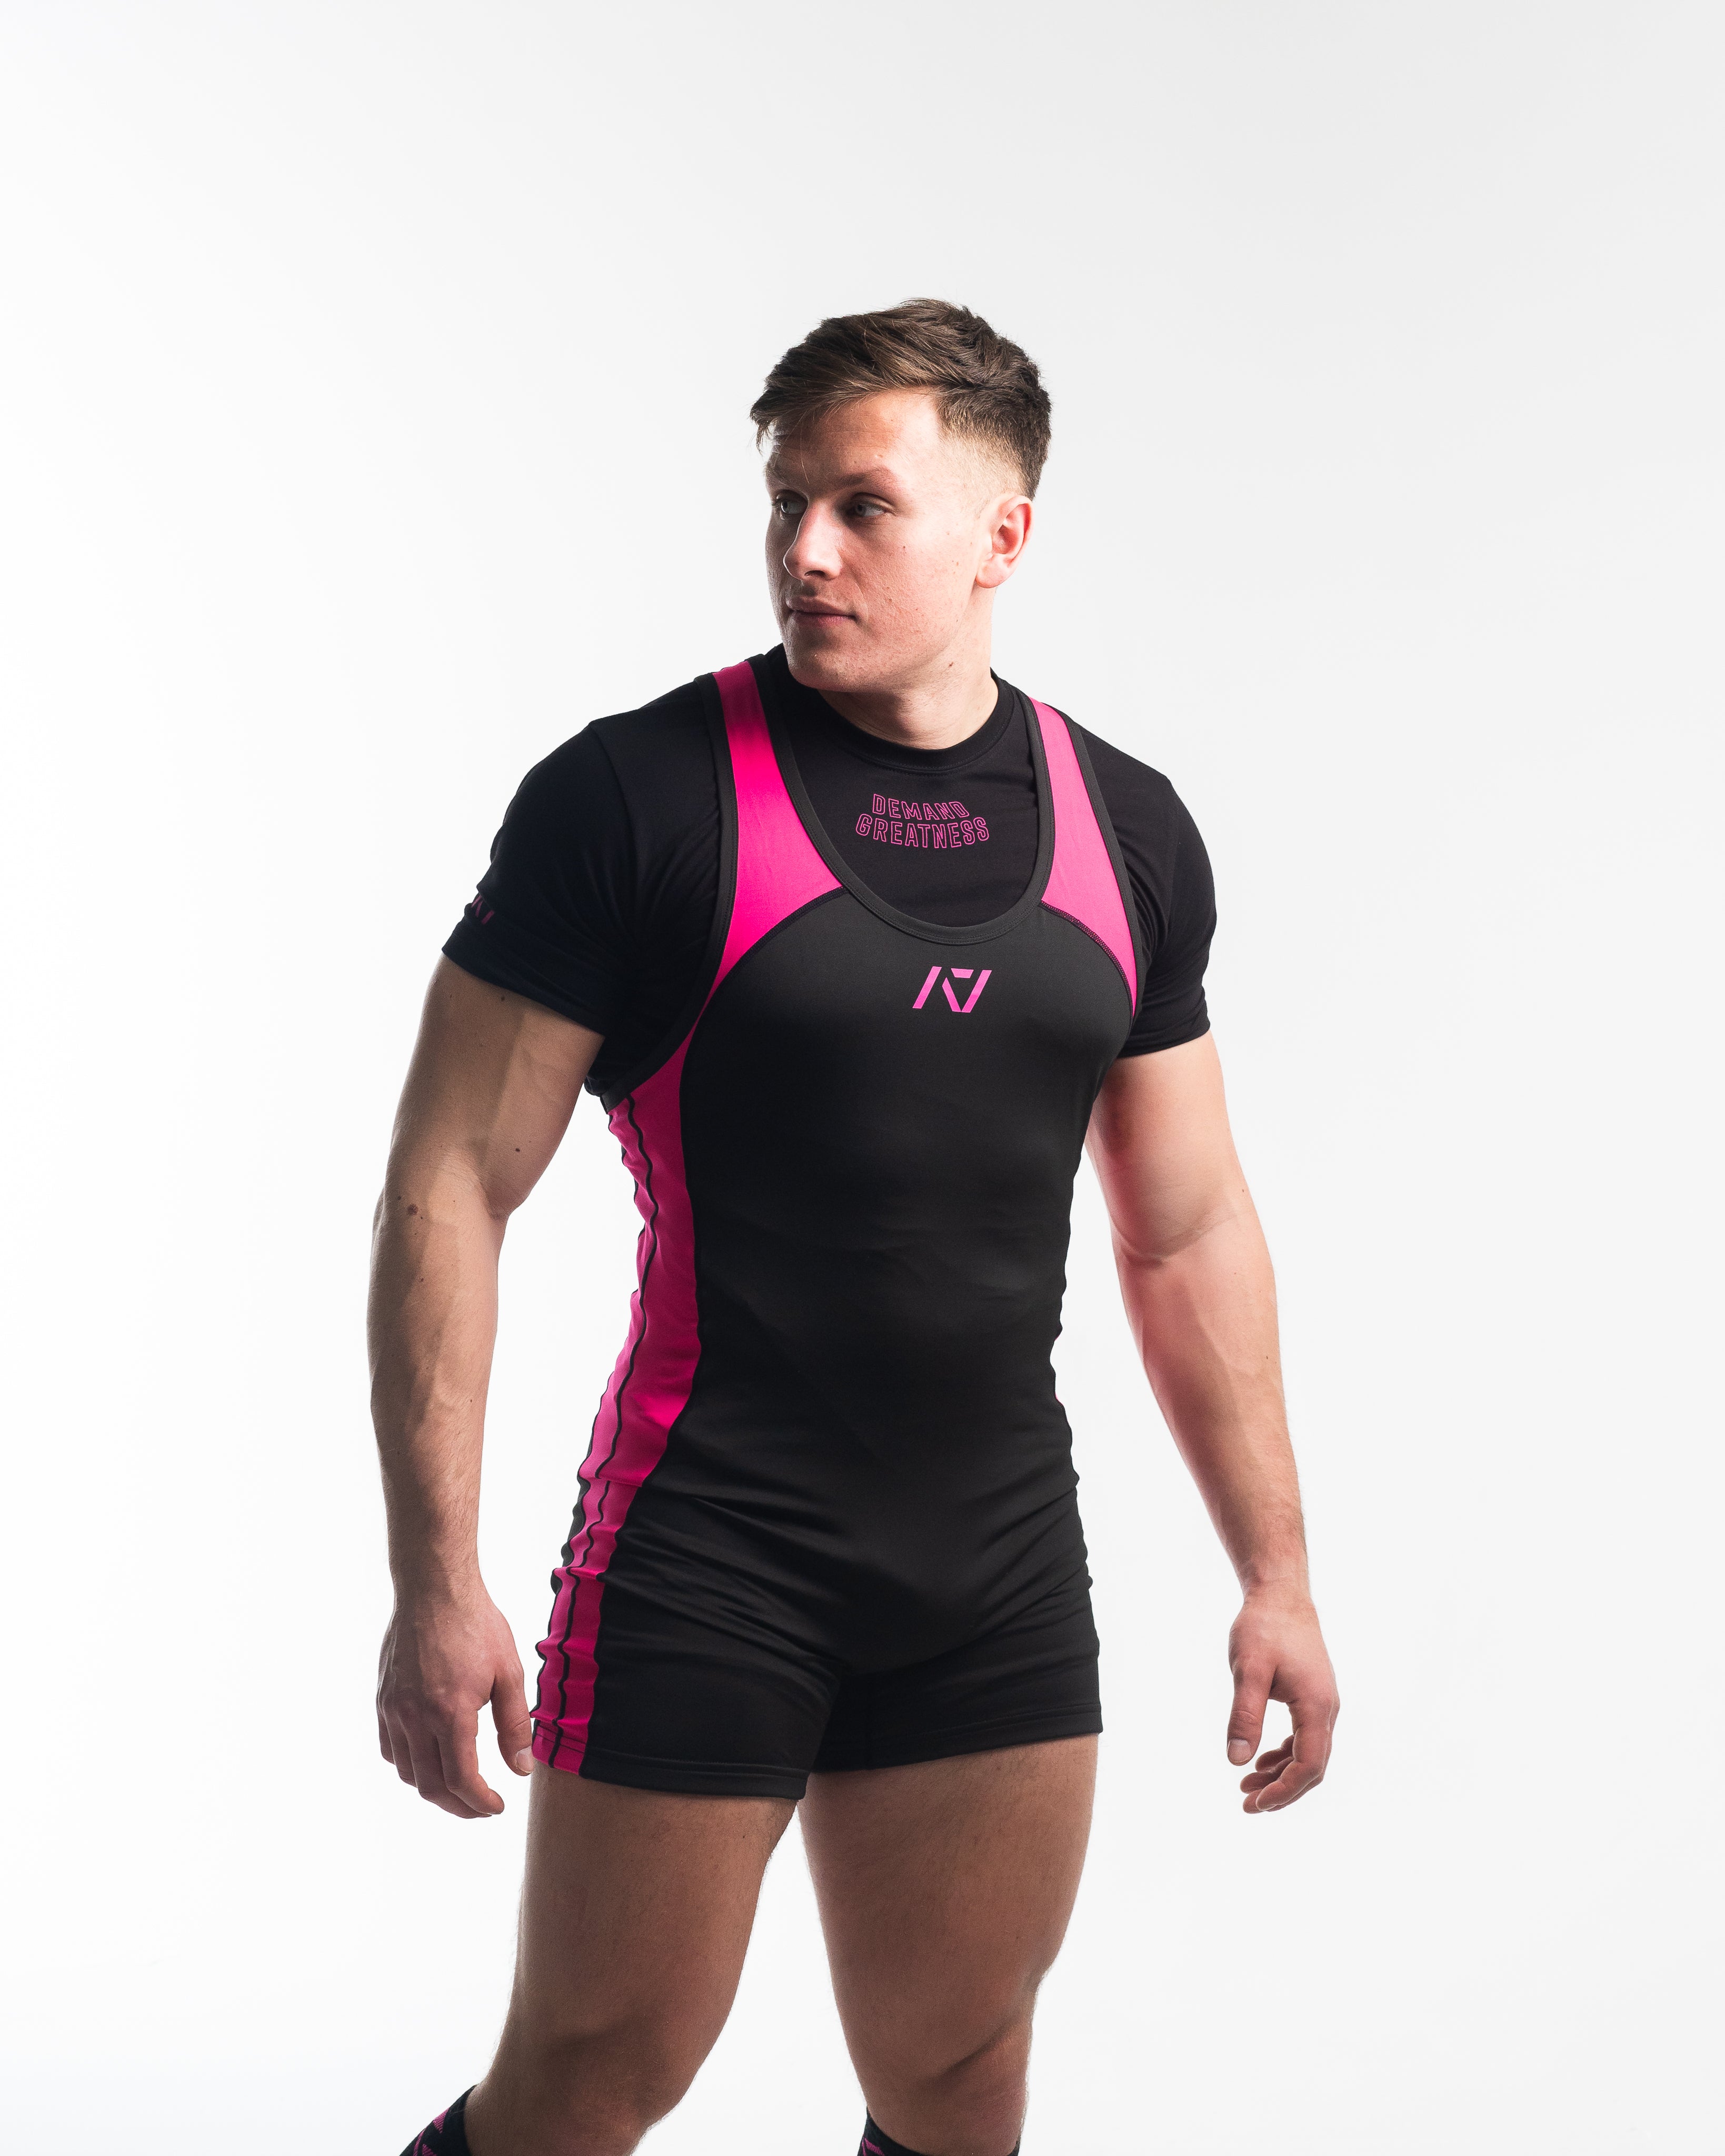 A7 Singlet - Pink - IPF Approved